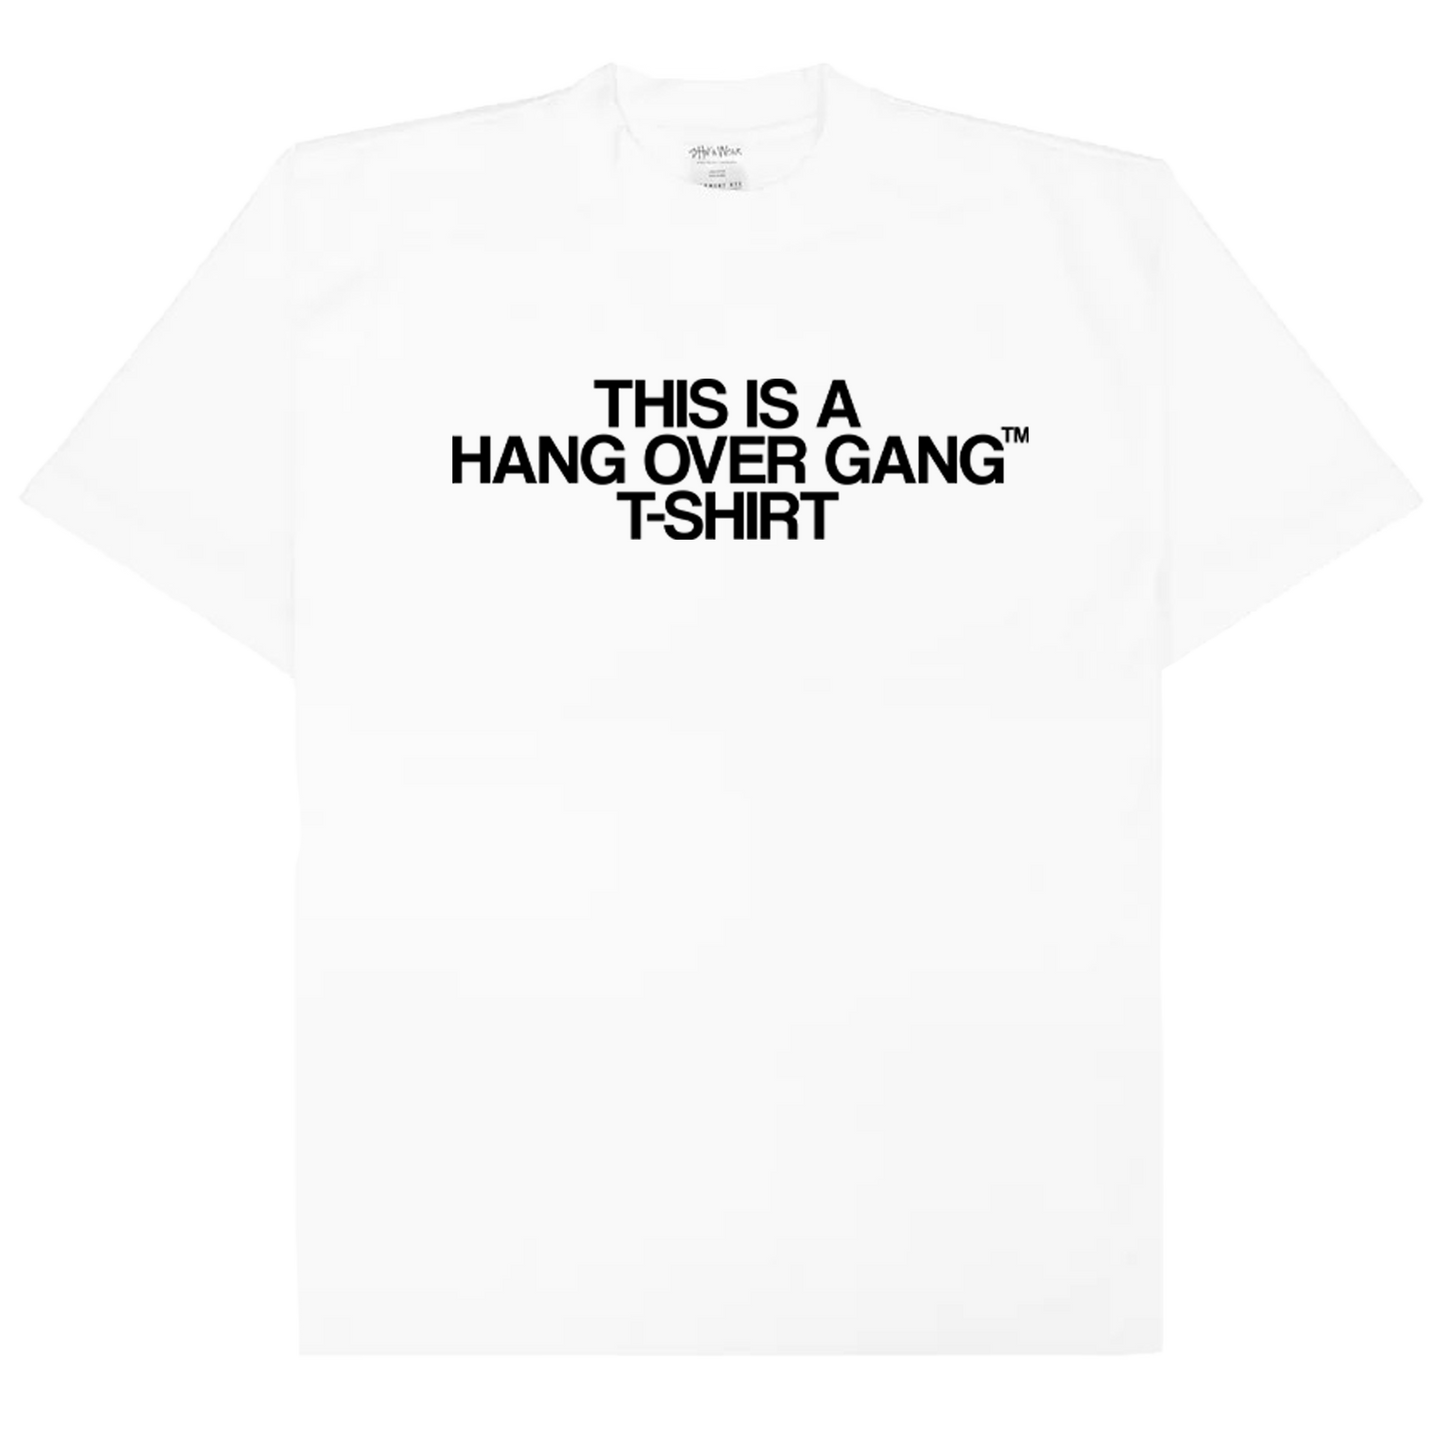 "This is a Hang Over Gang T-Shirt" Oversized Tee